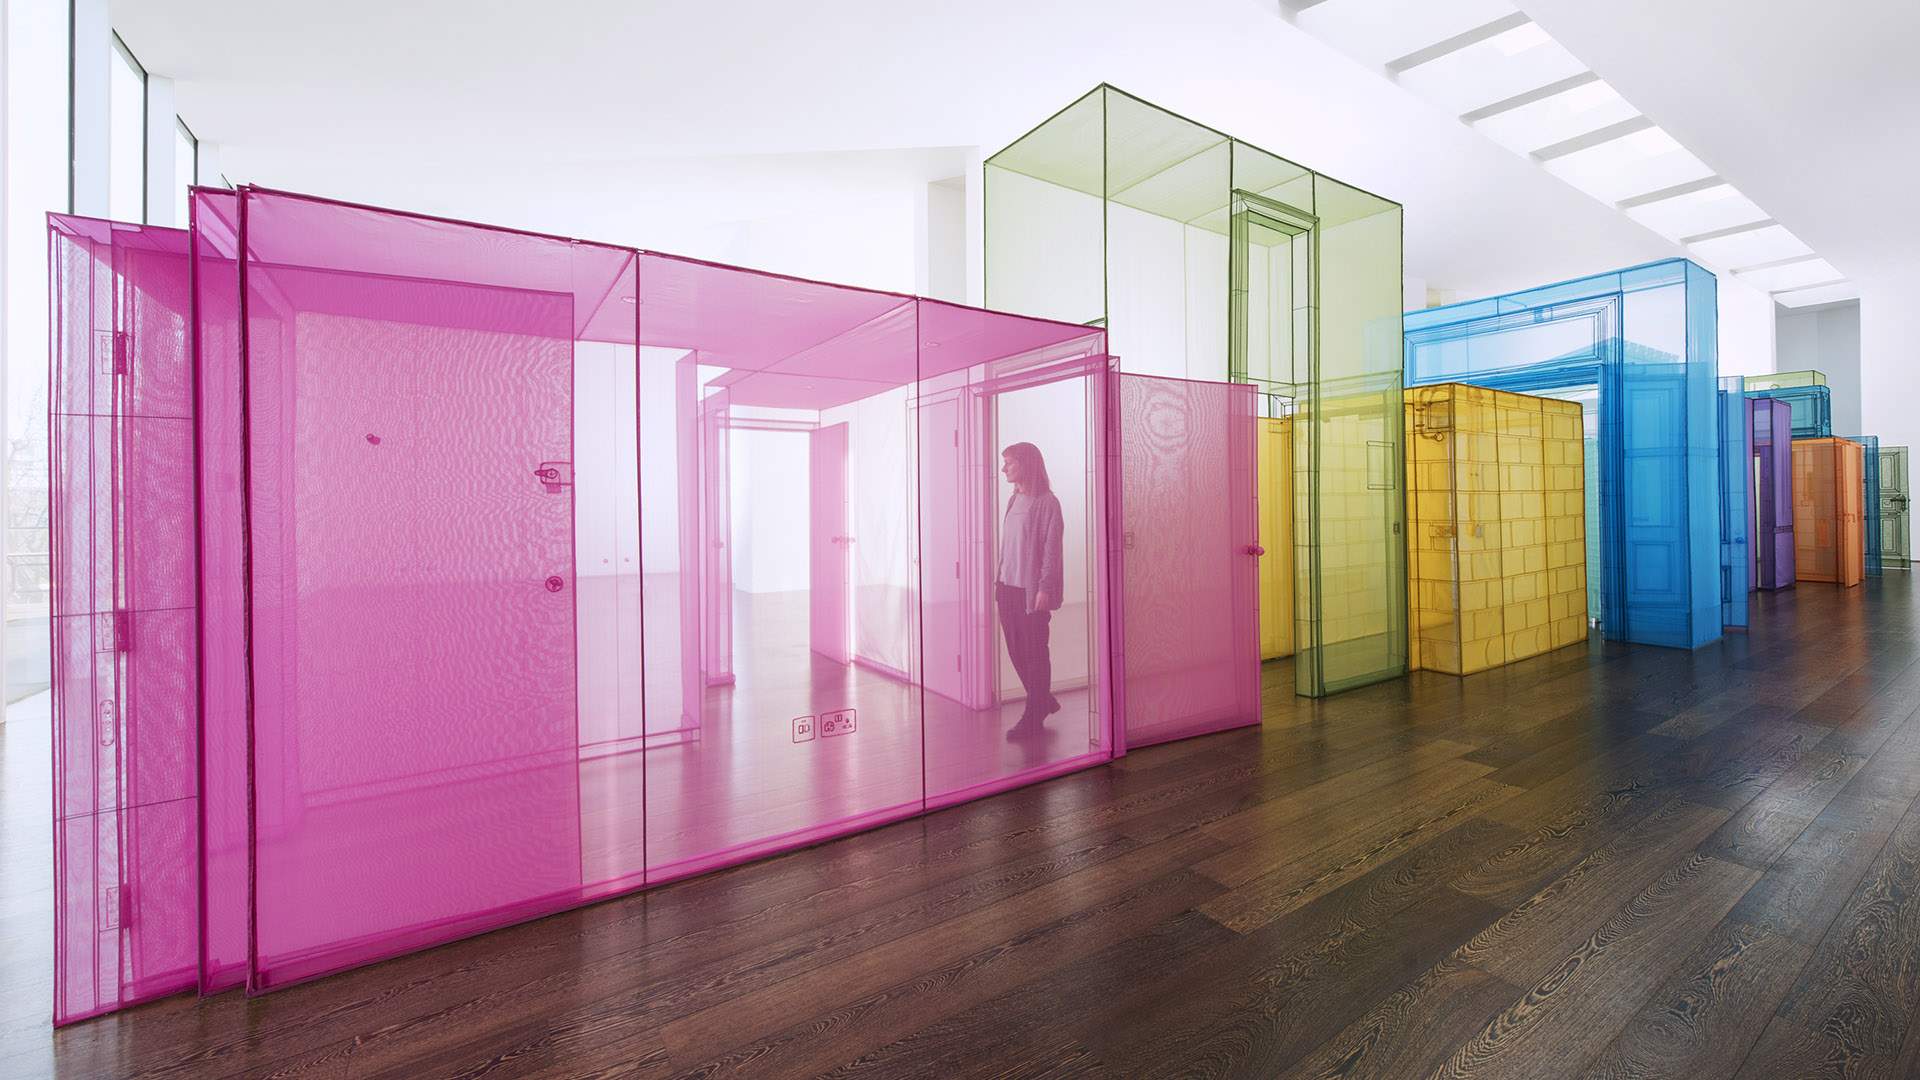 The MCA Will Be Filled with Colourful Architectural Installations for Its Huge Do Ho Suh Exhibition